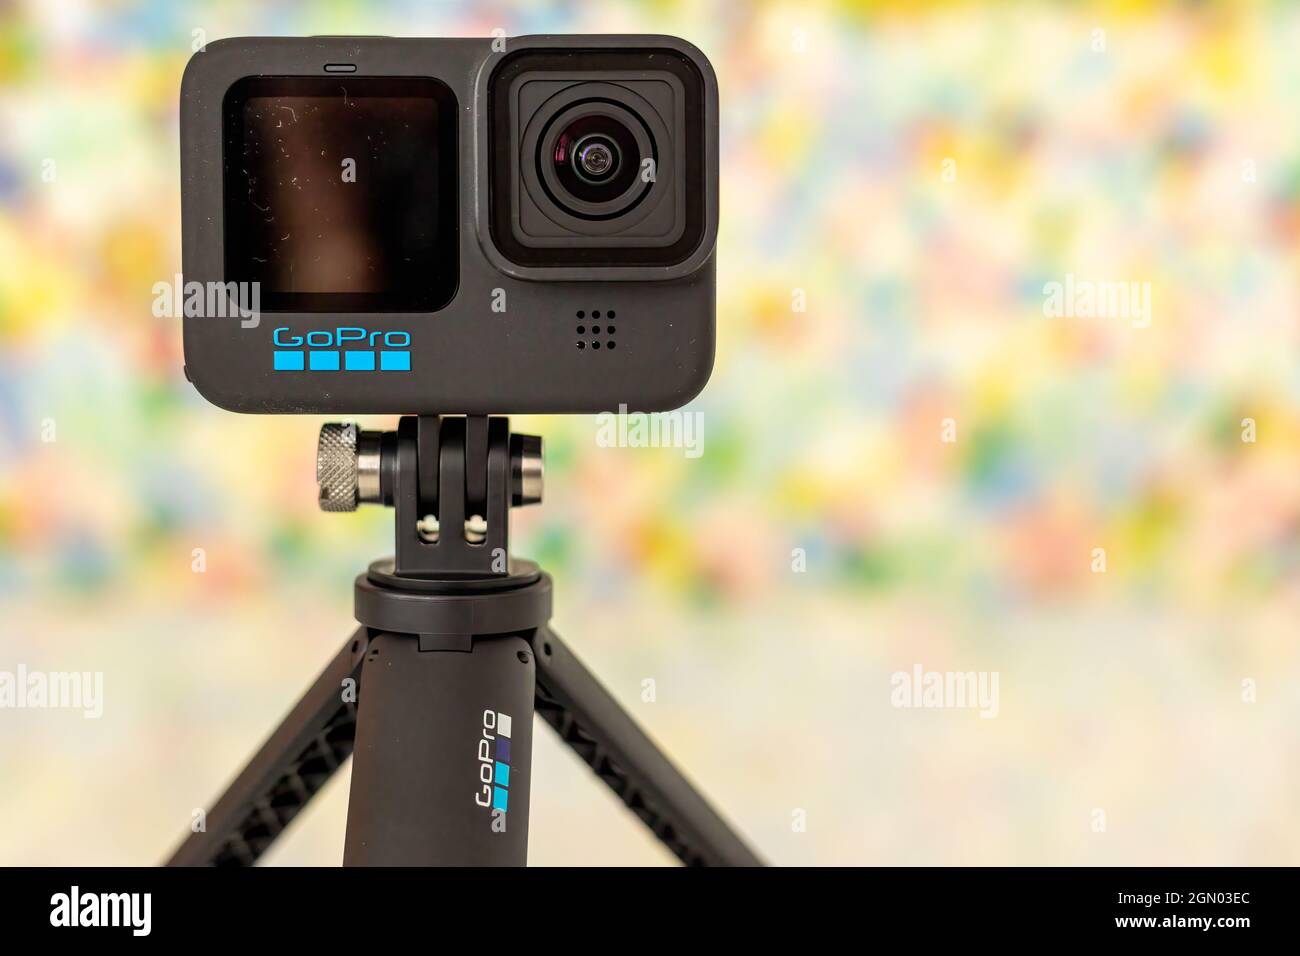 Frankfurt, Germany - 20th September 2021: A german photographer bought the  all new GoPro Hero 10 action camera, unboxing the extra bundle Stock Photo  - Alamy